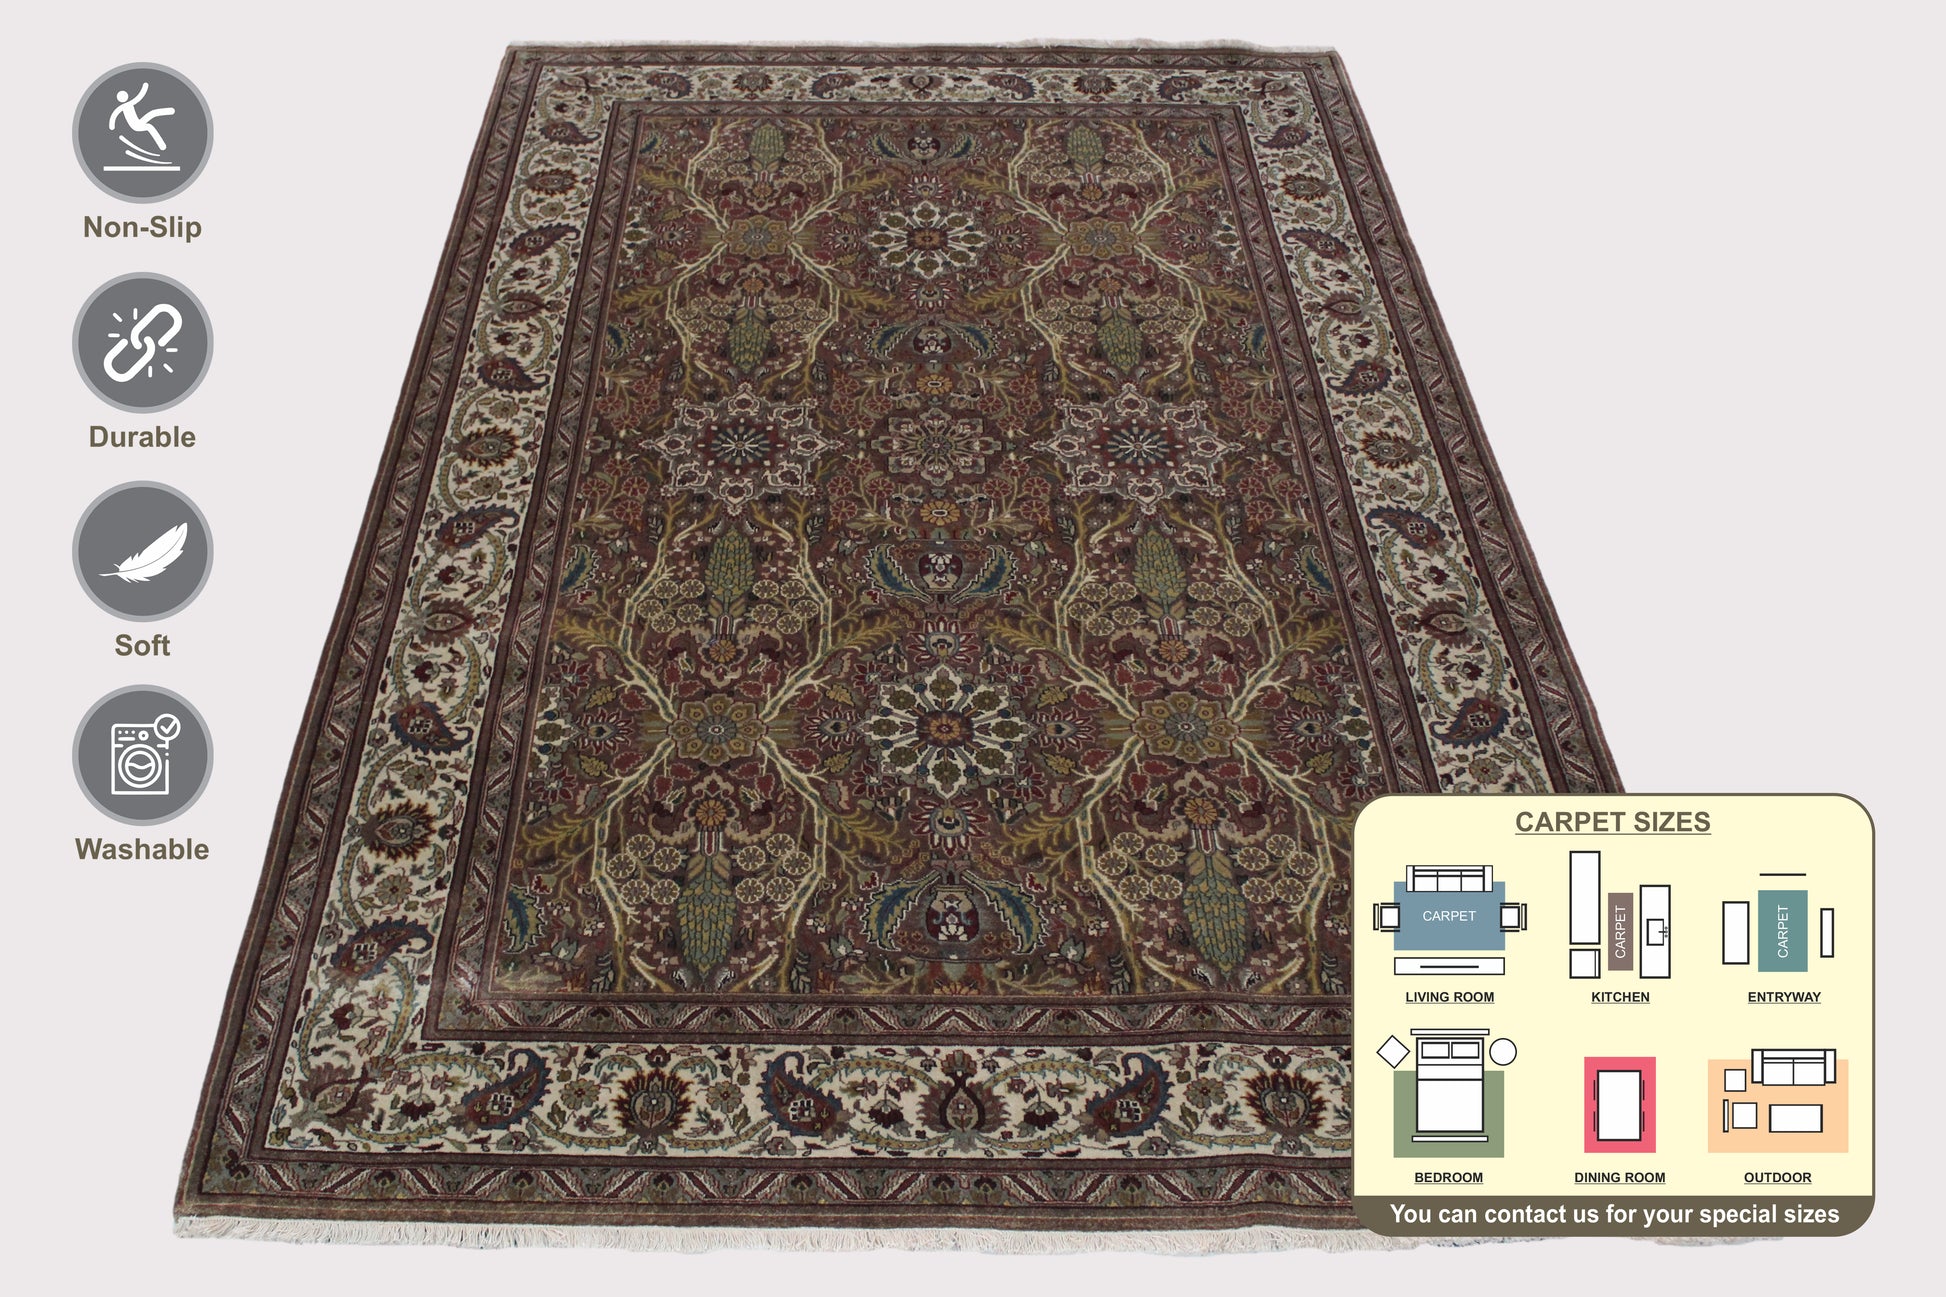 Sultanabad Area Rug 284cm x 184cm